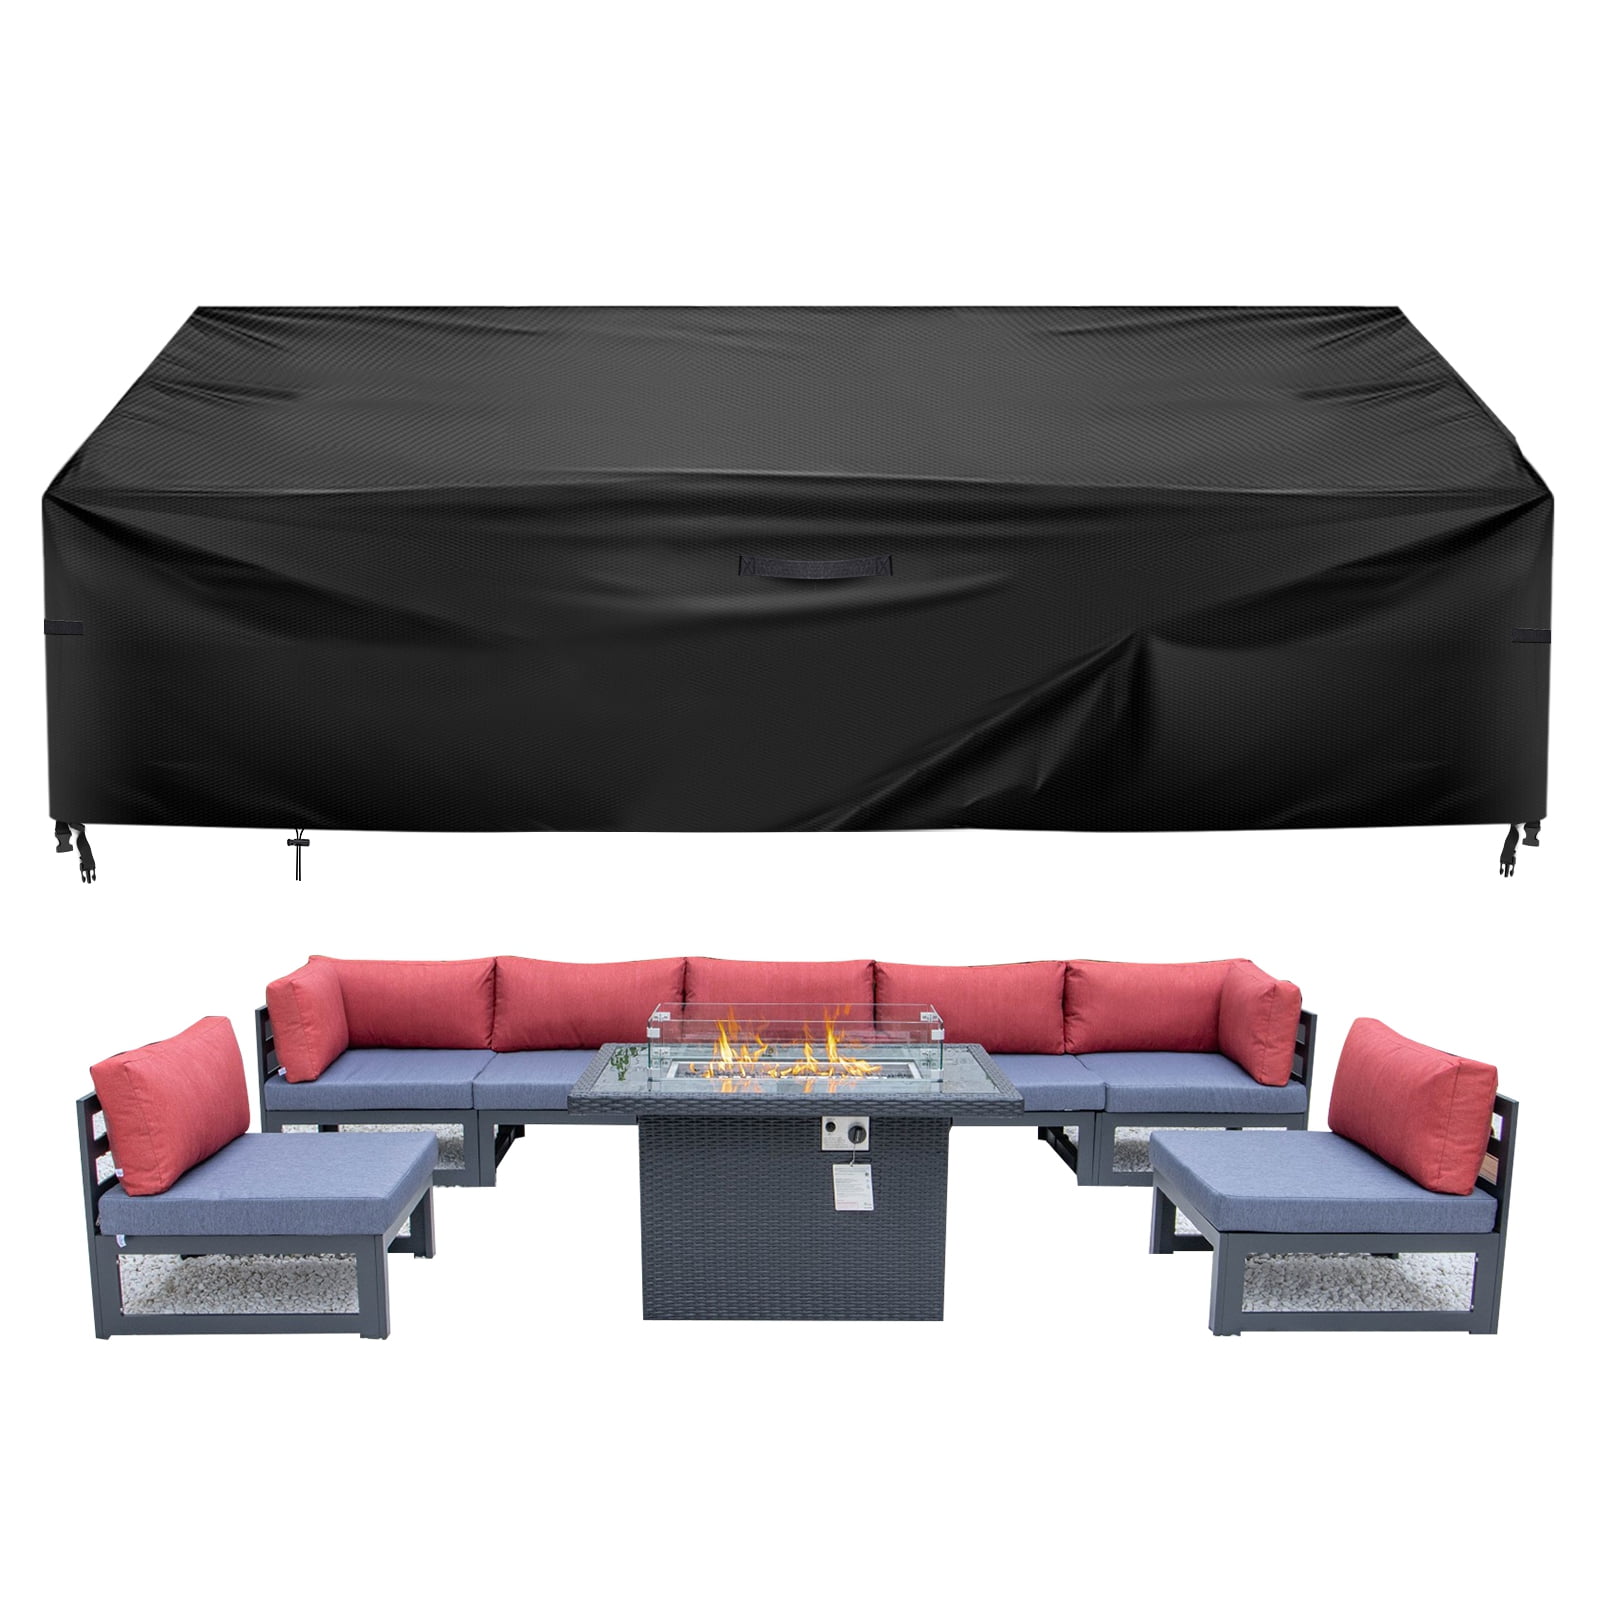 Heavy Duty Waterproof Outdoor Sectional Extra Large Patio Furniture Set Cover 